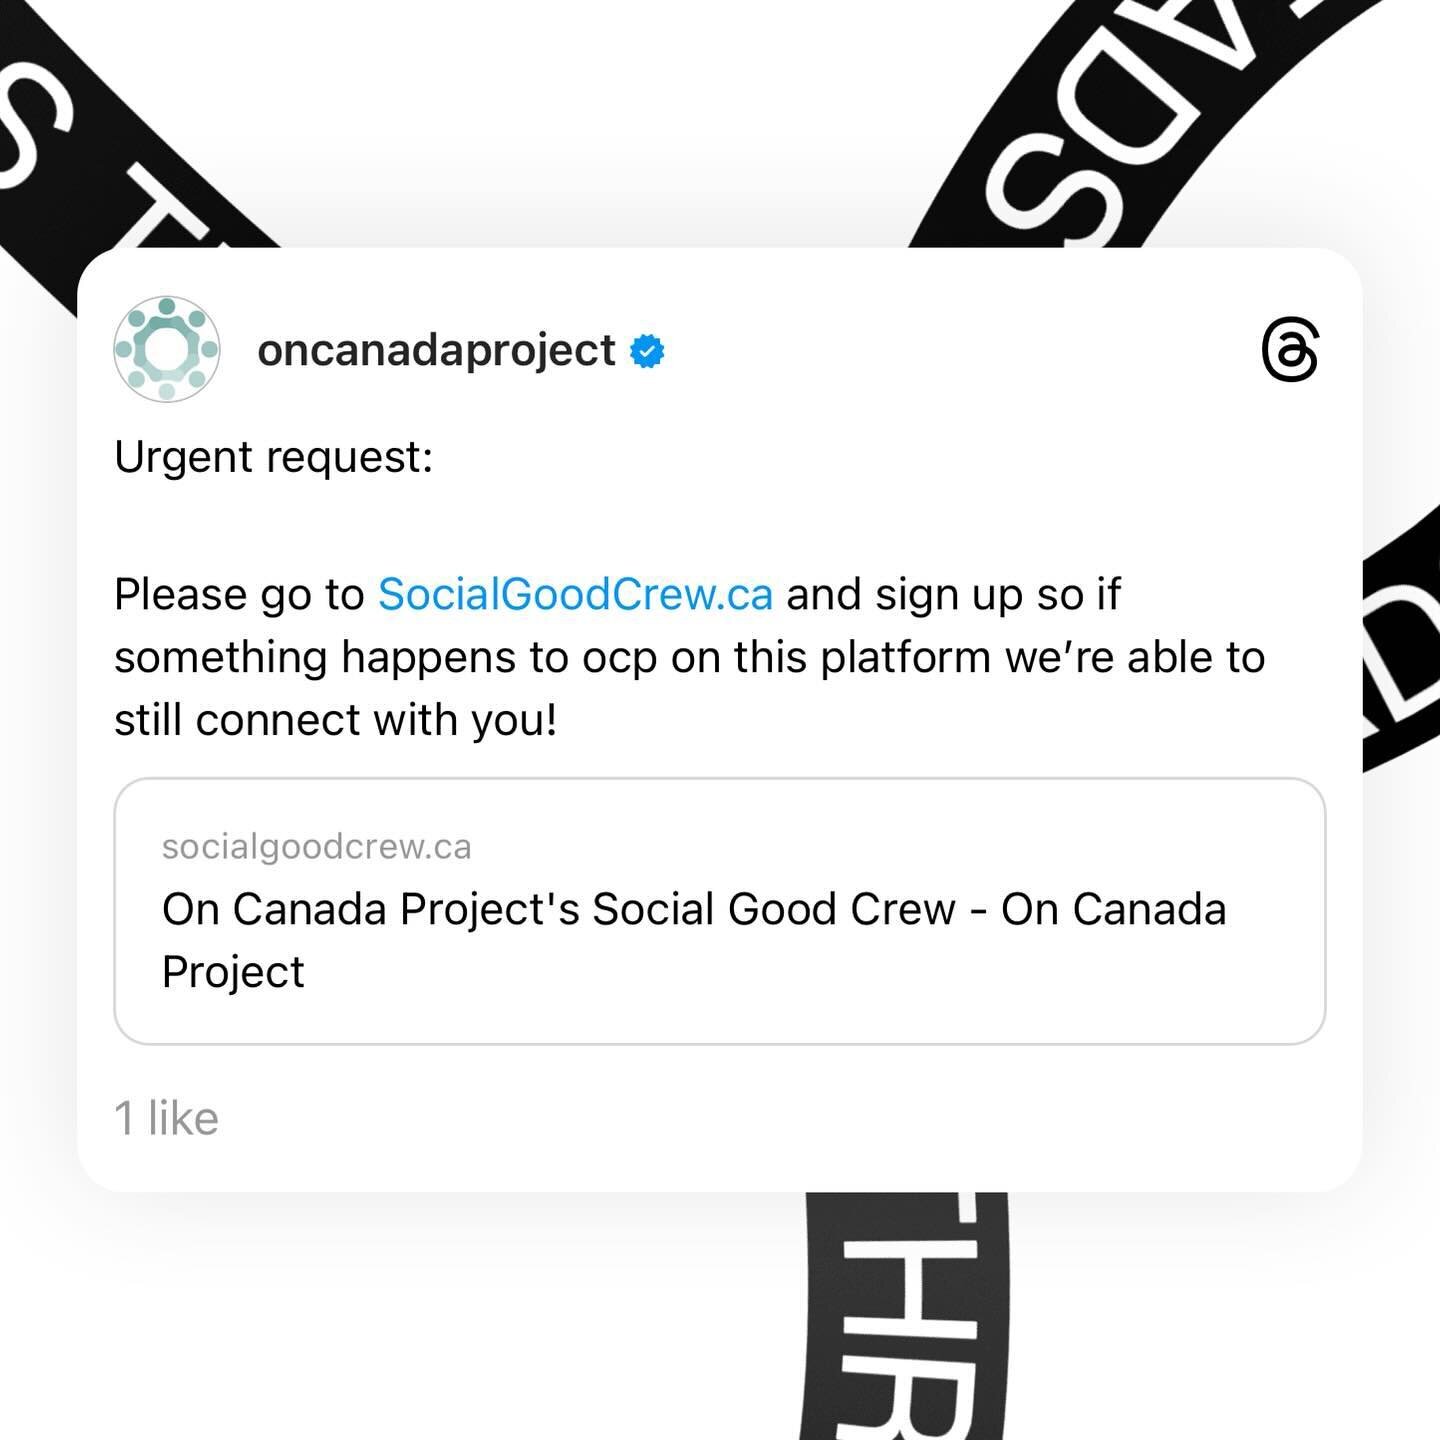 It&rsquo;s really important right now to have multiple different avenues of connecting with people. 

Please go to our link in bio or socjalgoodcrew.ca to sign up so that if something happened we&rsquo;d have the ability to keep connecting with you. 